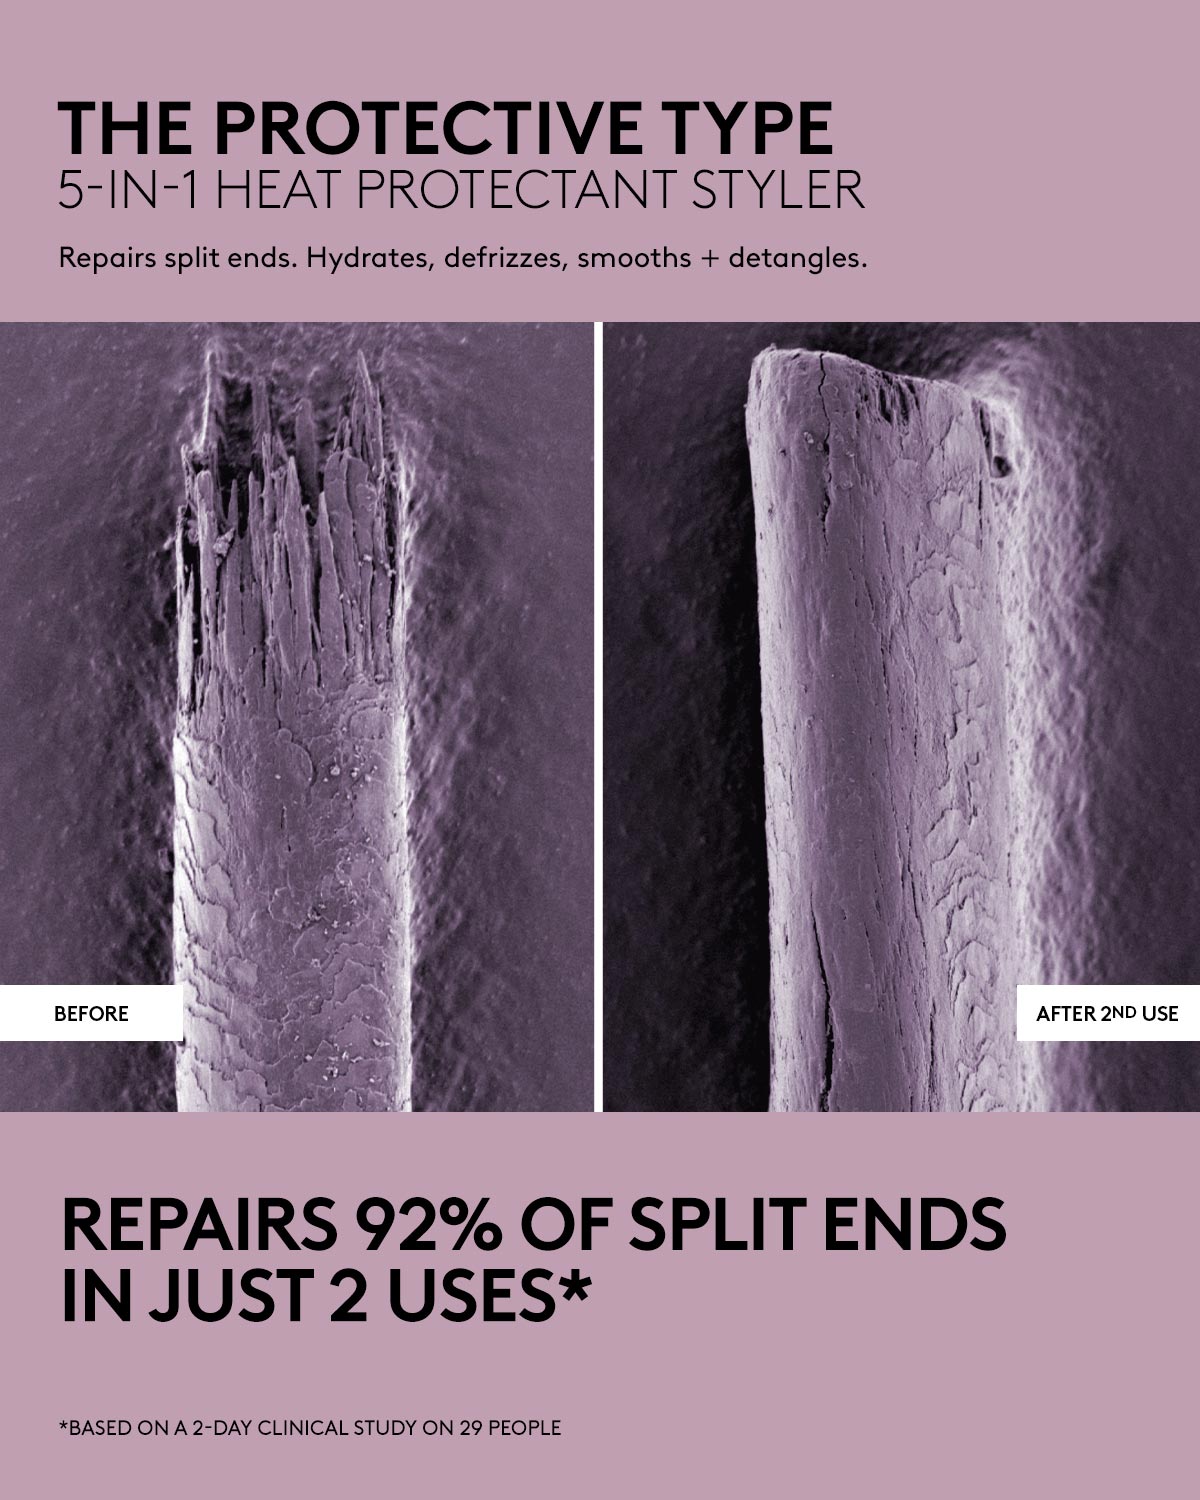 The Protective Type 5-in-1 Heat Protectant Styler